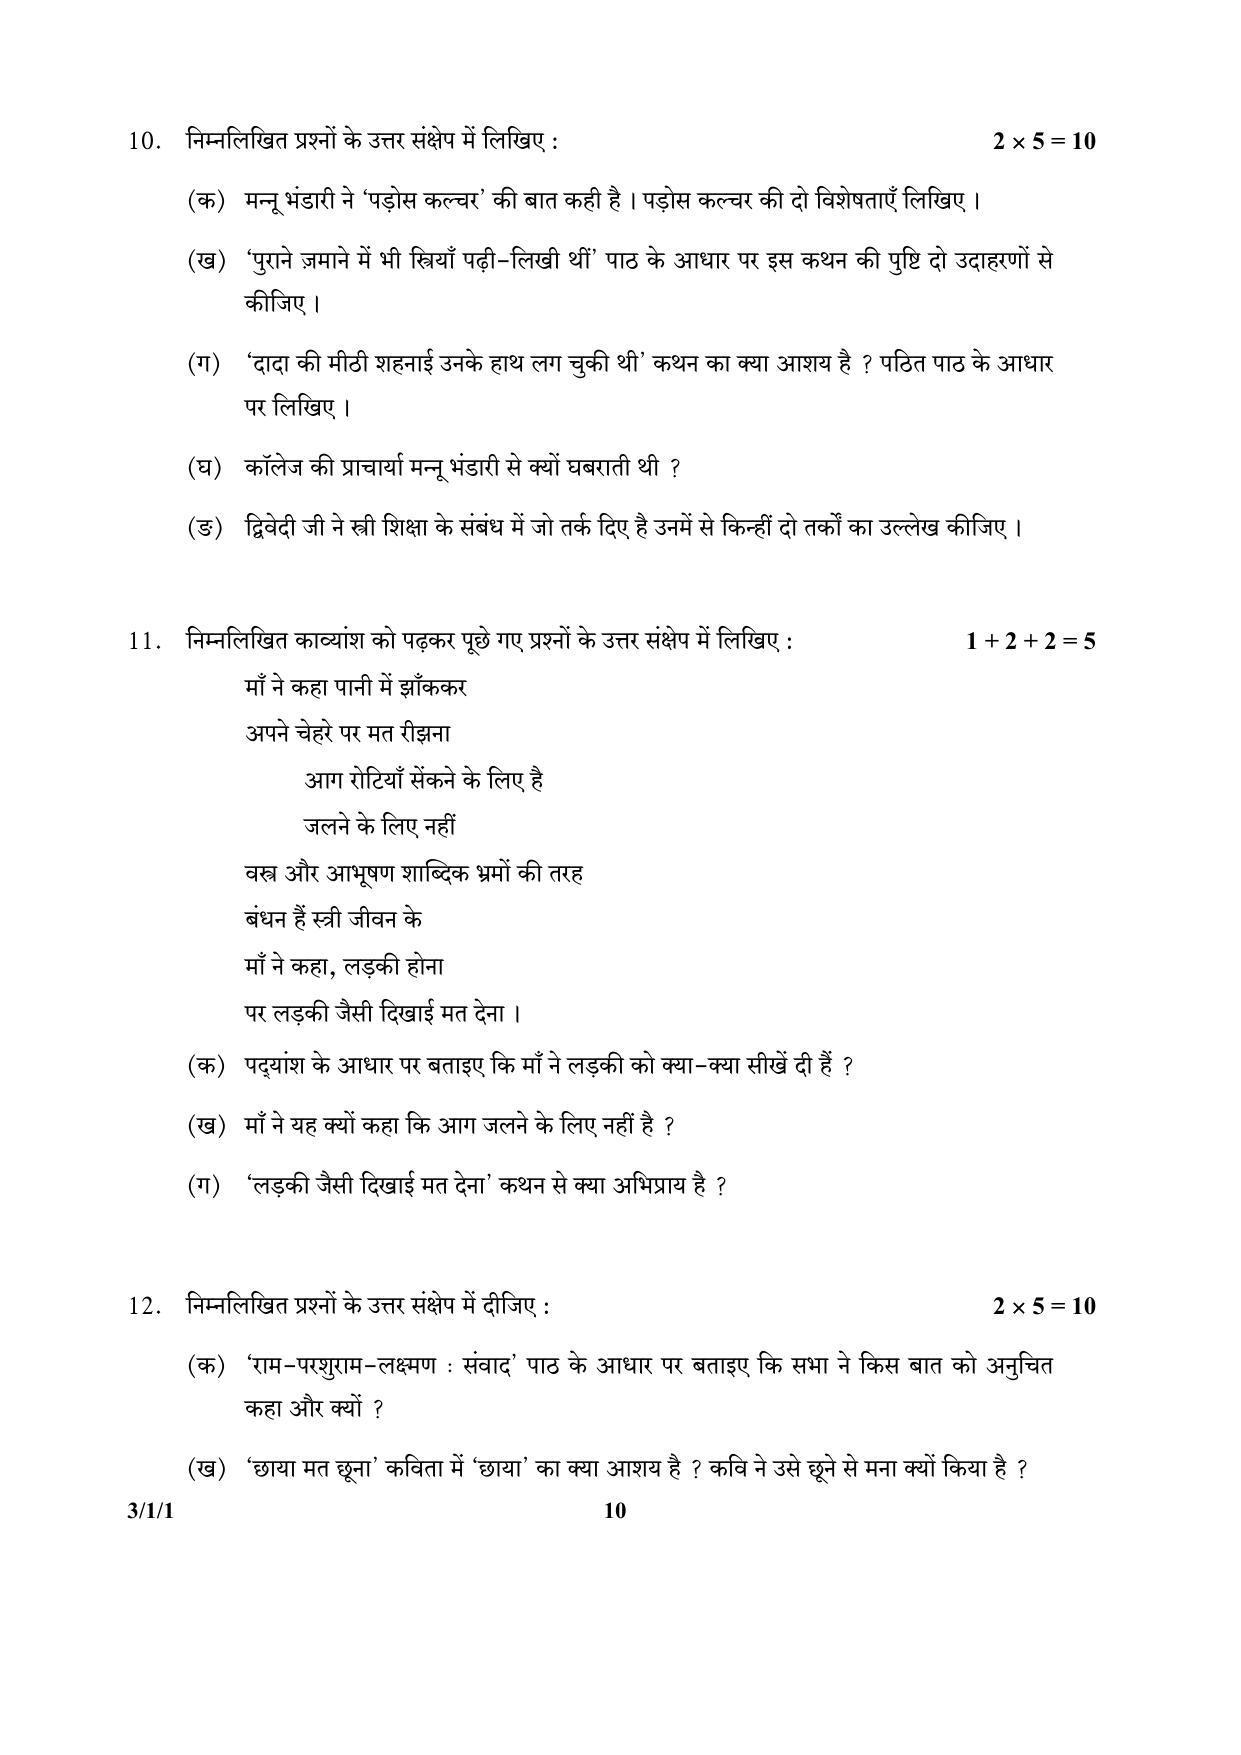 CBSE Class 10 3-1-1 (Hindi) 2017-comptt Question Paper - Page 10